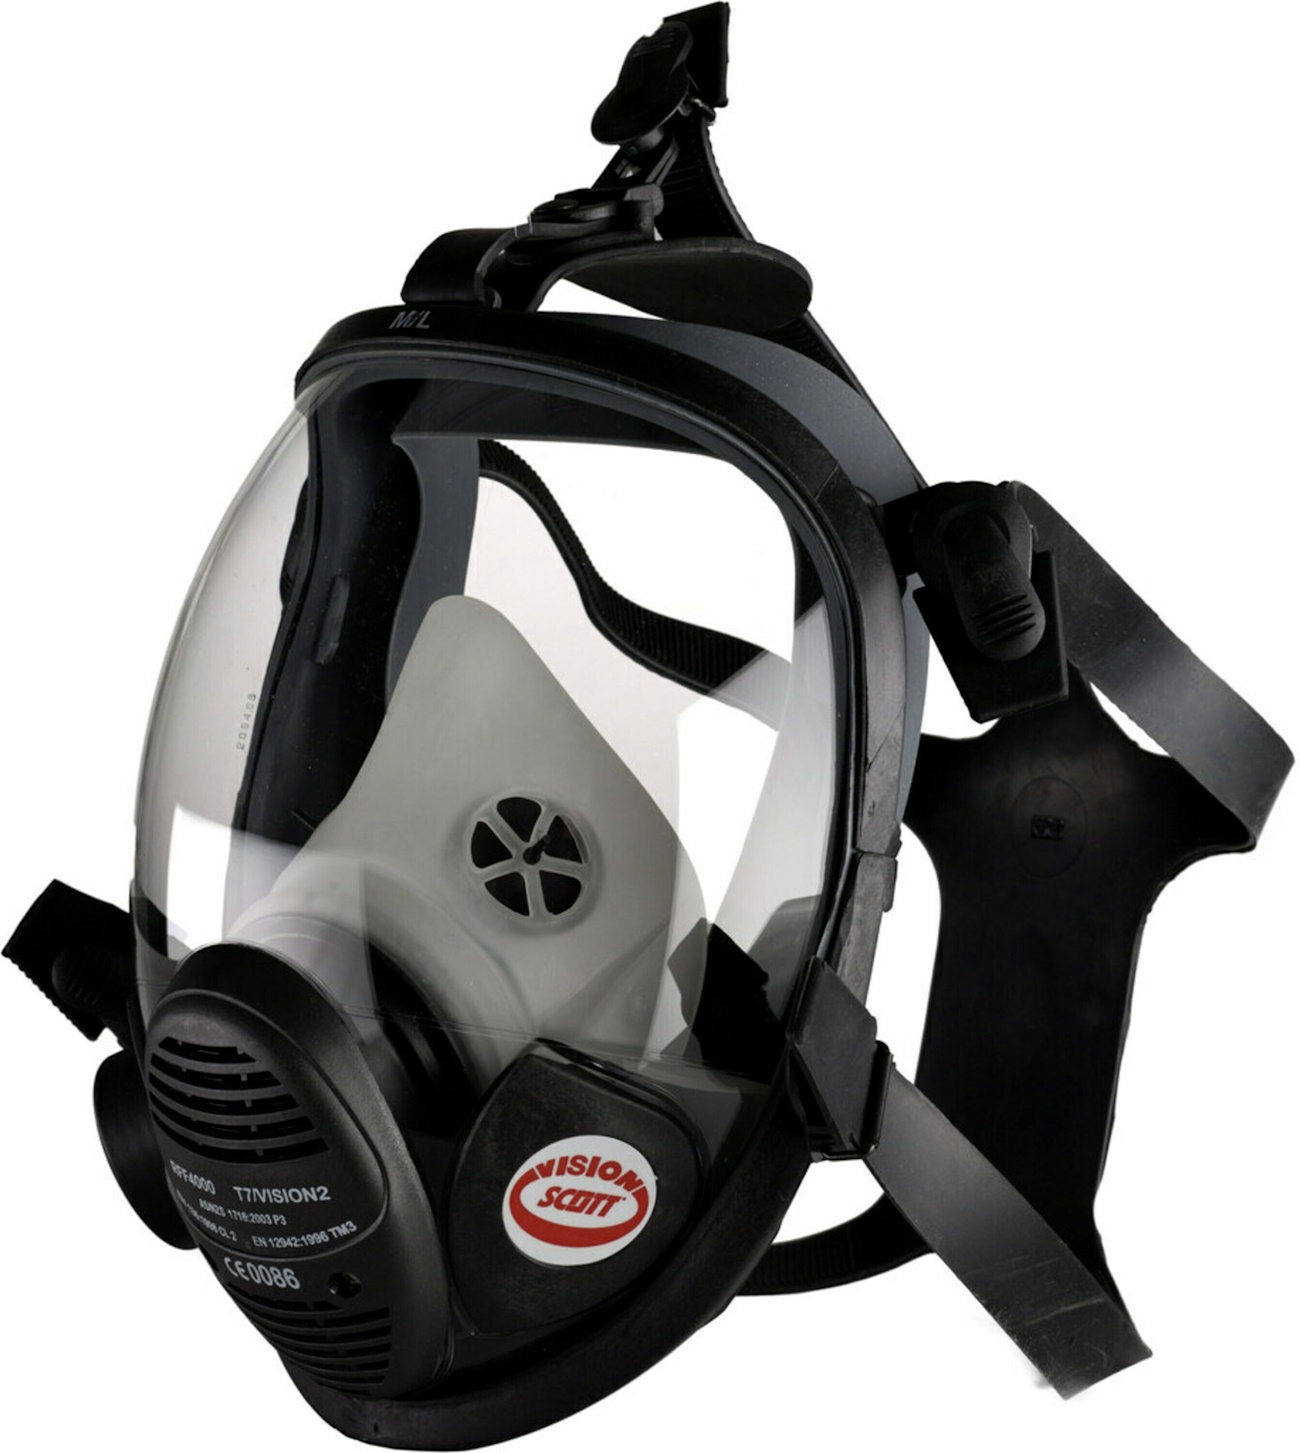 3M full face mask with filter connection on the front FF-601F, small (size S)